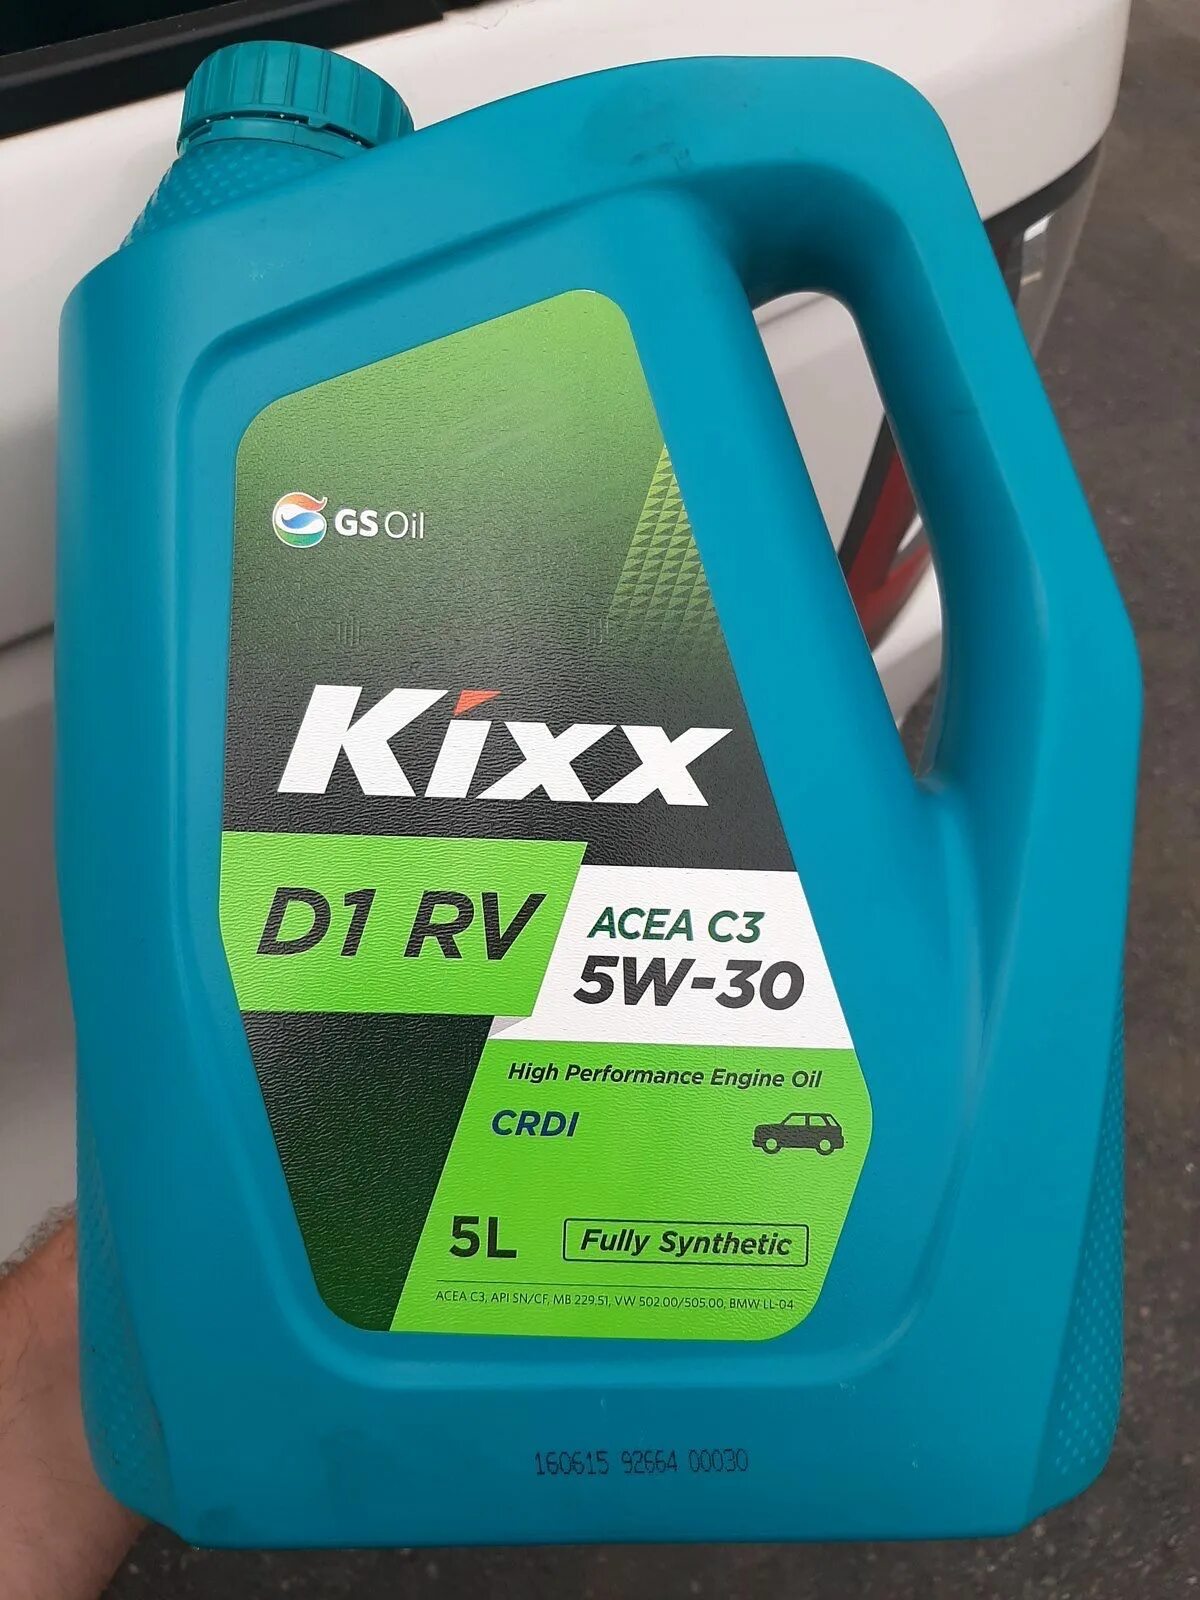 Kixx d1 RV 5w-30 c3 /5л. Кикс d1rv 5w30. Kixx d1 RV 5w-30 200. Kixx 5w30 fully Synthetic. Асеа с3 масло